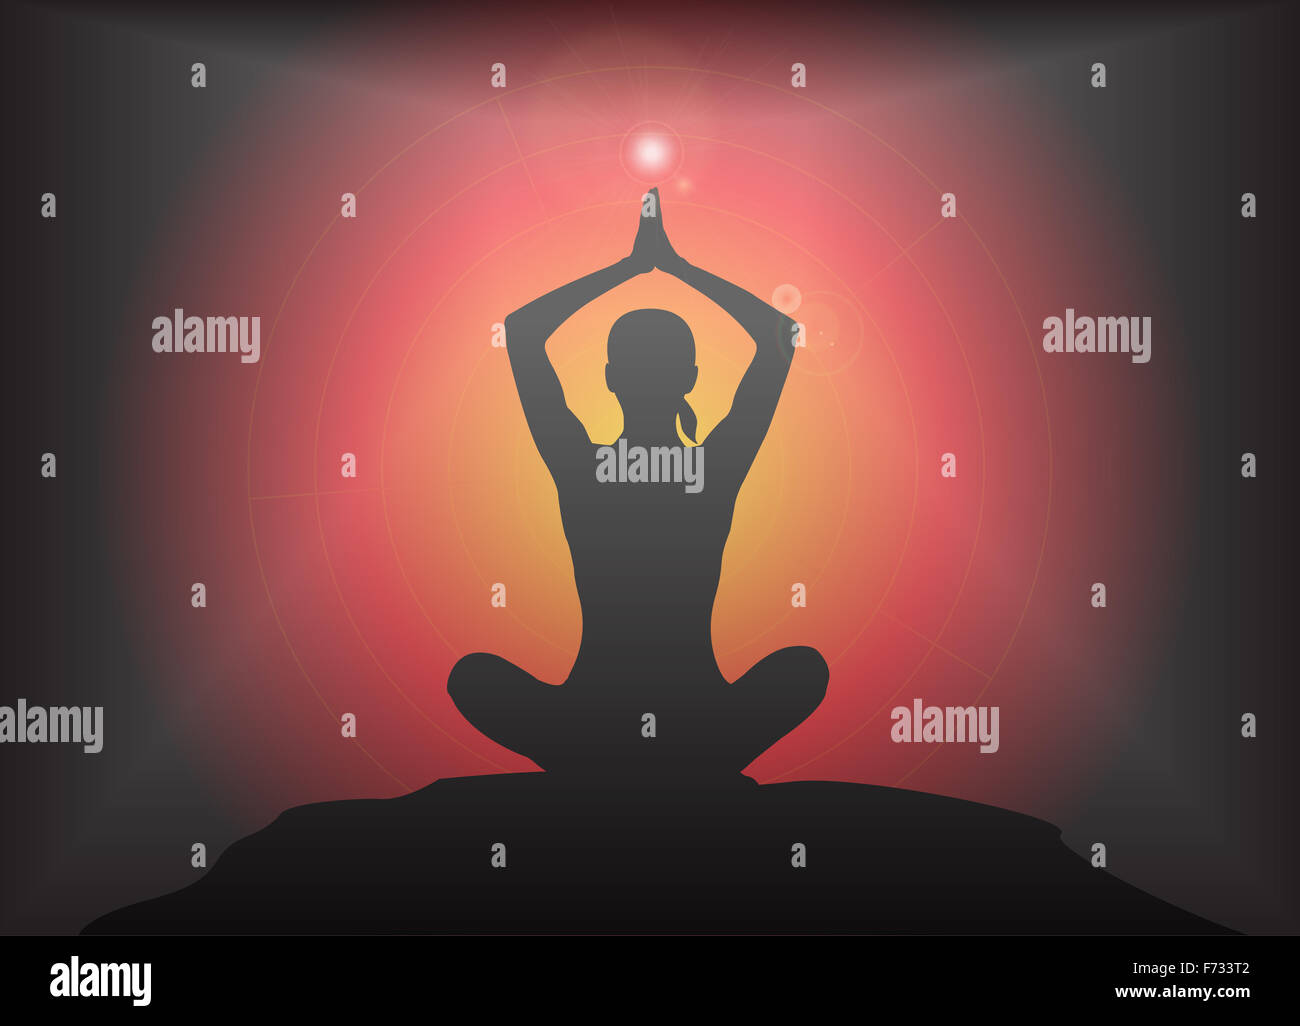 A Yoga Woman Silhouette Performing Arms Overhead Lotus Pose On A Dark